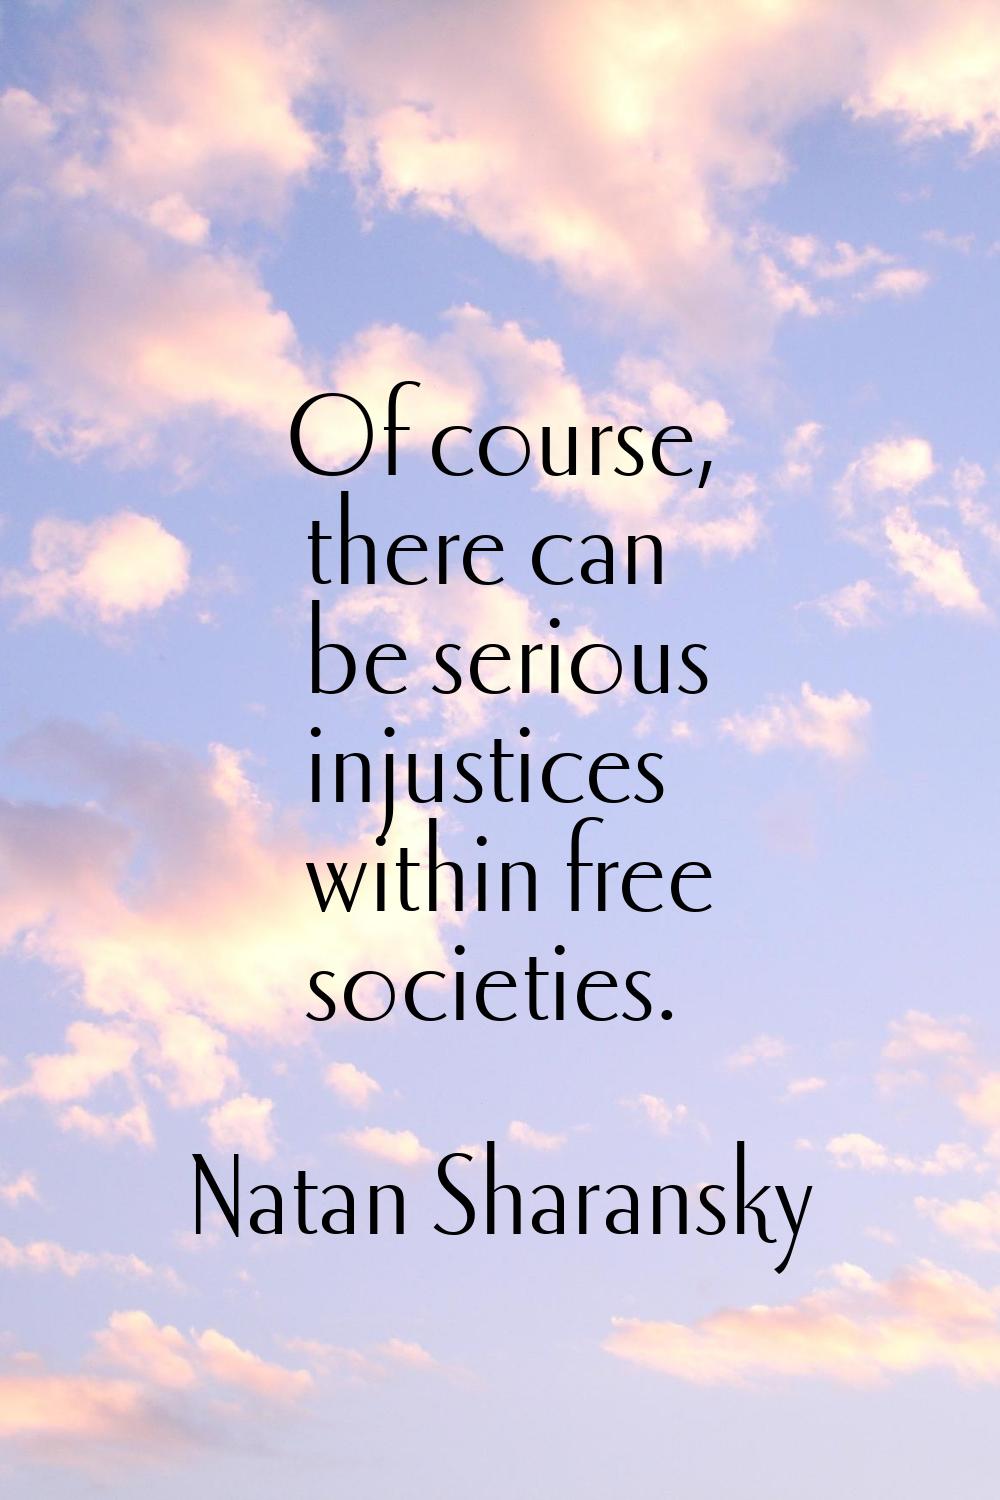 Of course, there can be serious injustices within free societies.